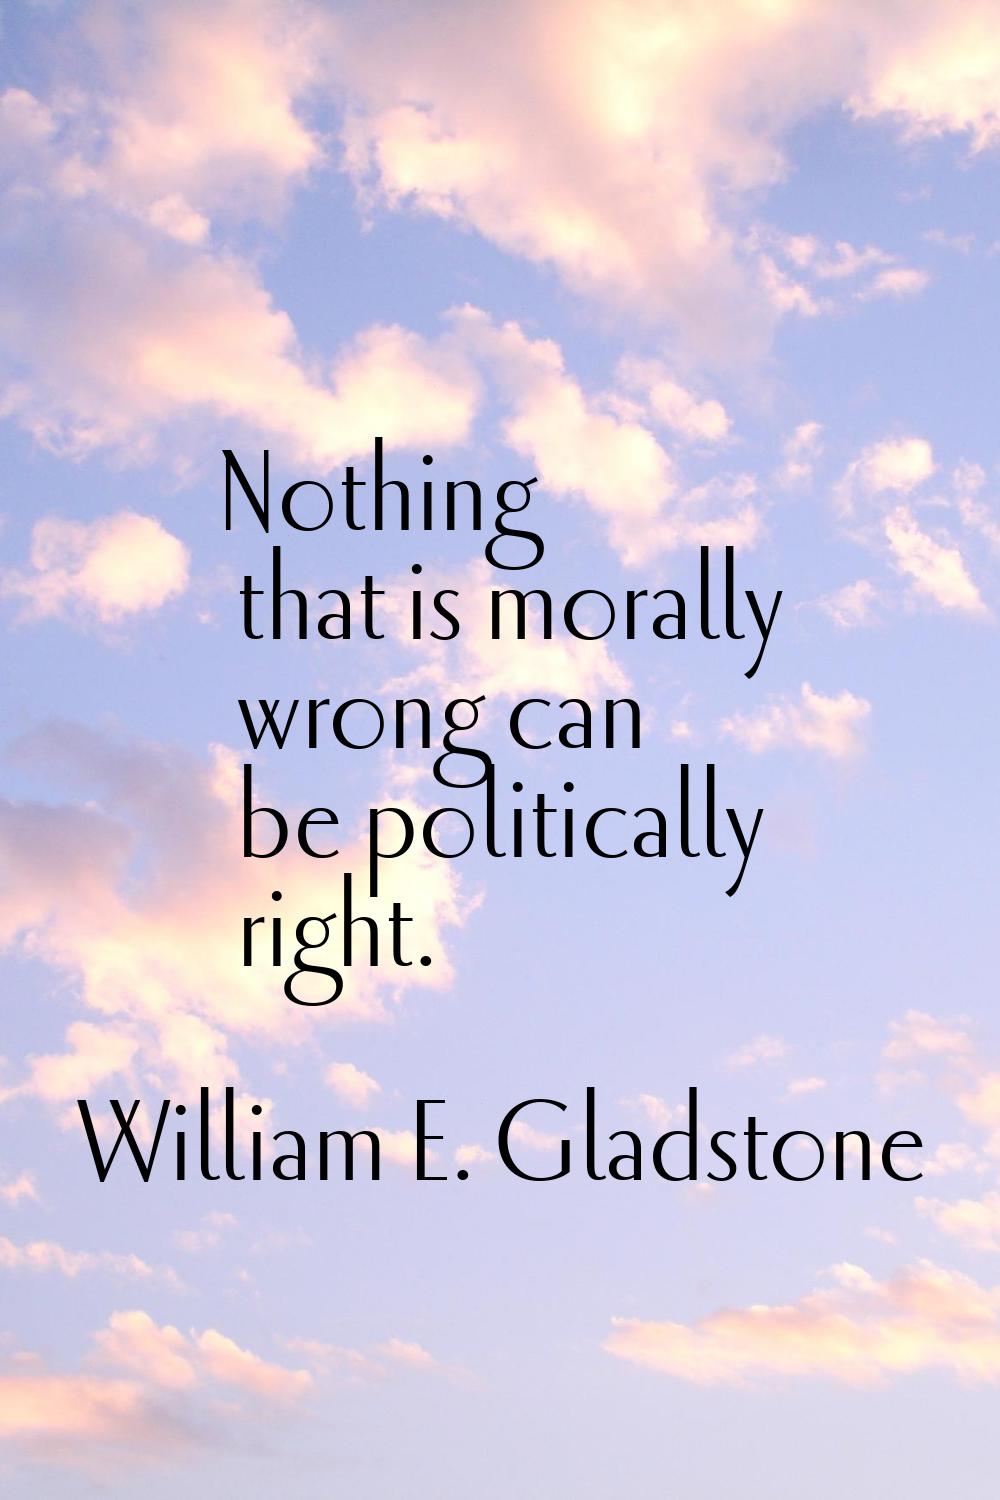 Nothing that is morally wrong can be politically right.